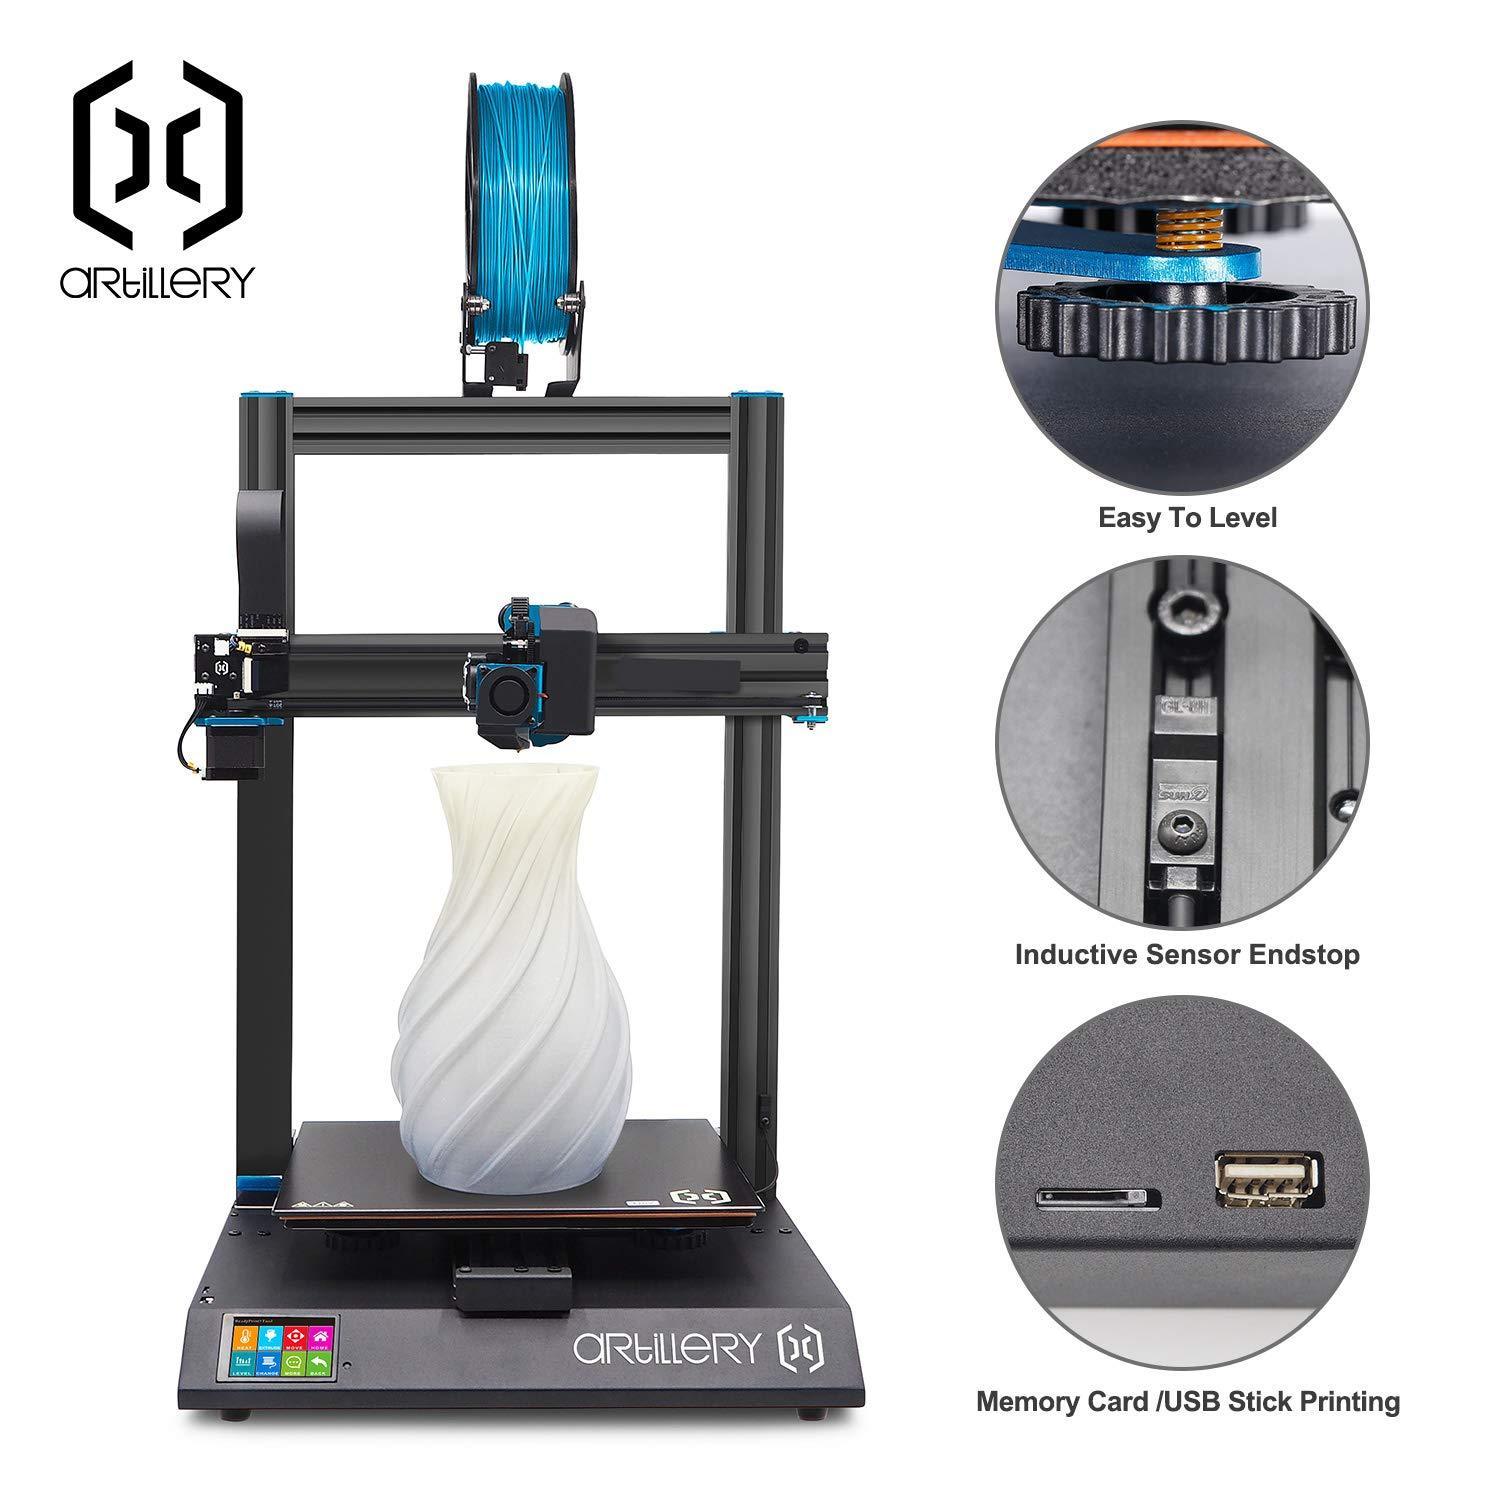 Artillery® Sidewinder X1 V4 High Precision 3D Printer (300*300*400mm Large Print Size) Resume Print/Filament Run-out Detection With Dual Z axis & TFT LCD - PrinterMods